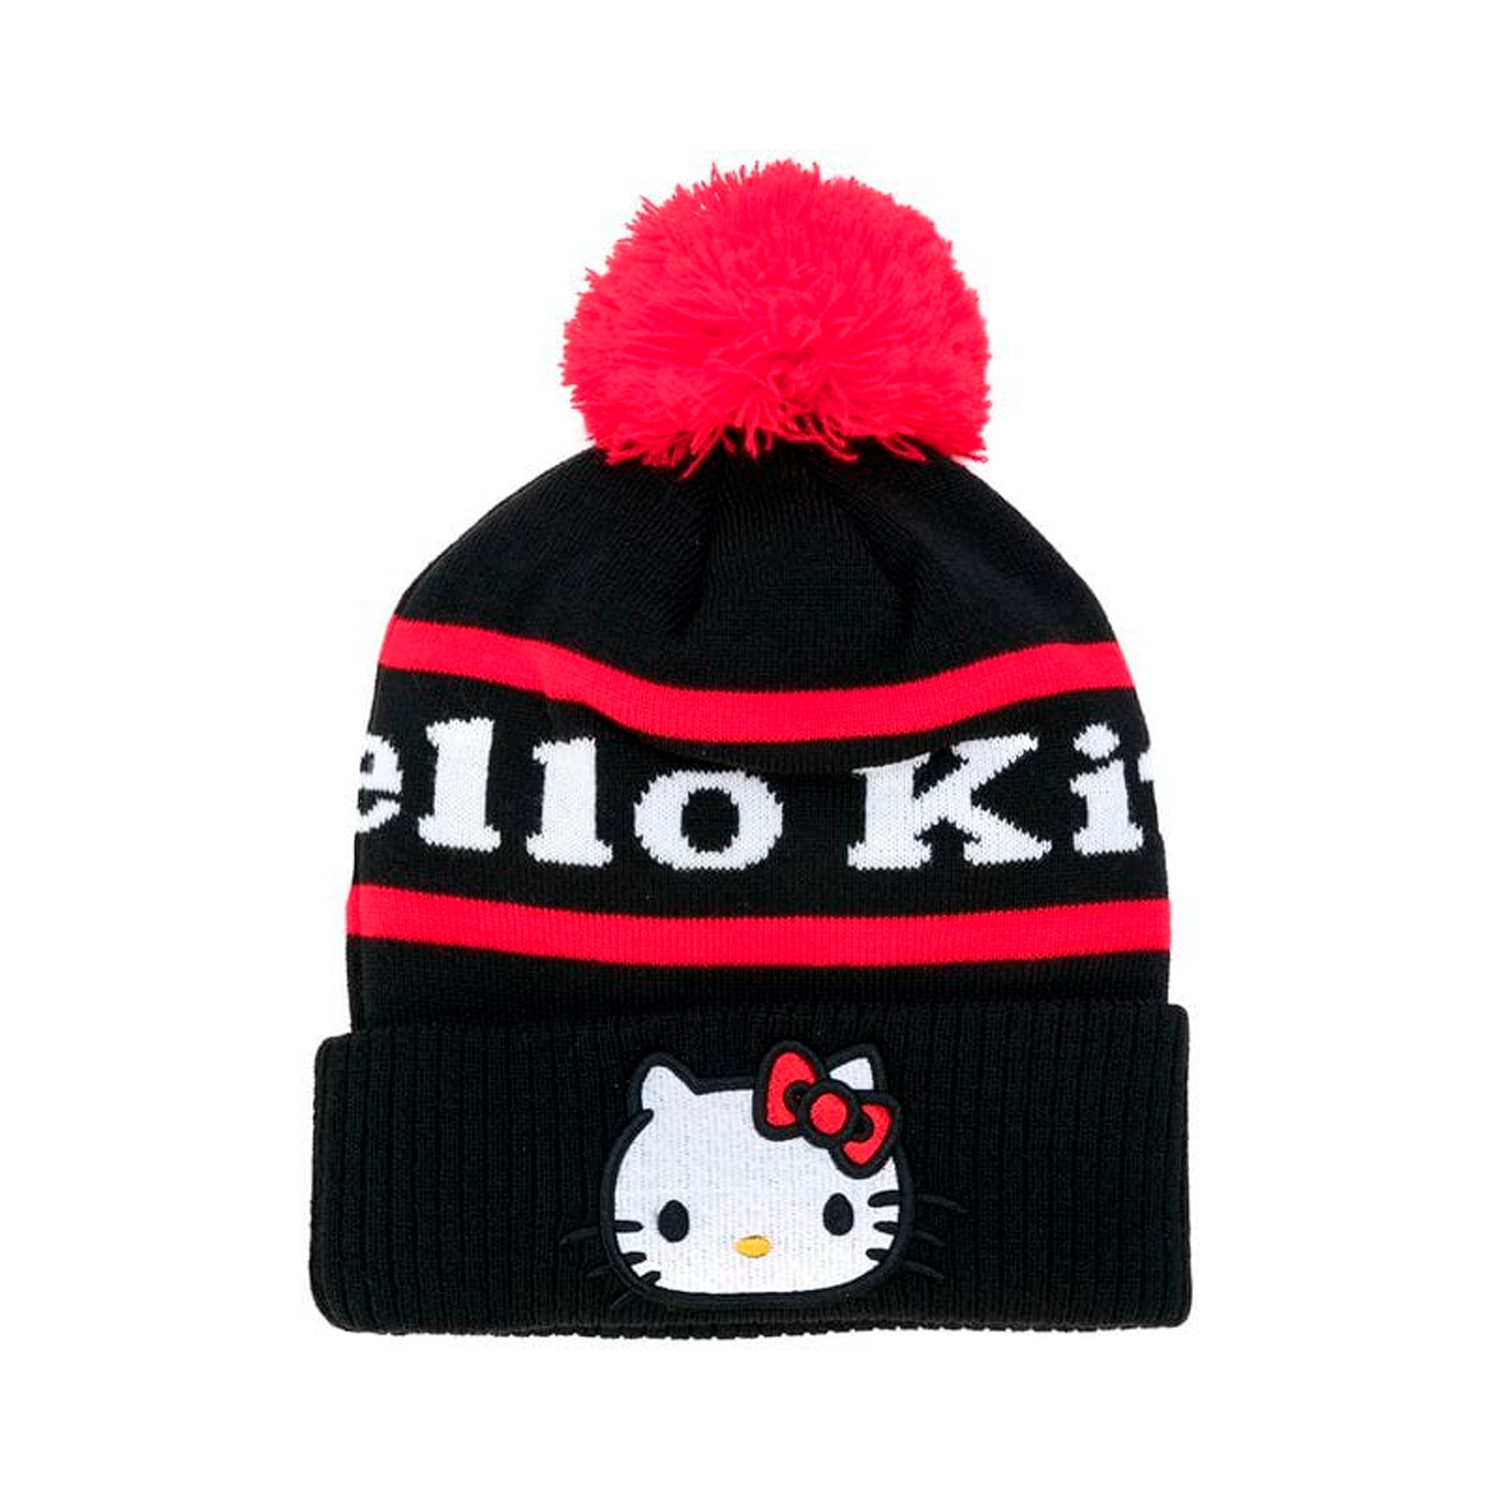 GCDS × Hello Kitty Knitted Beanie | WHAT’S ON THE STAR?